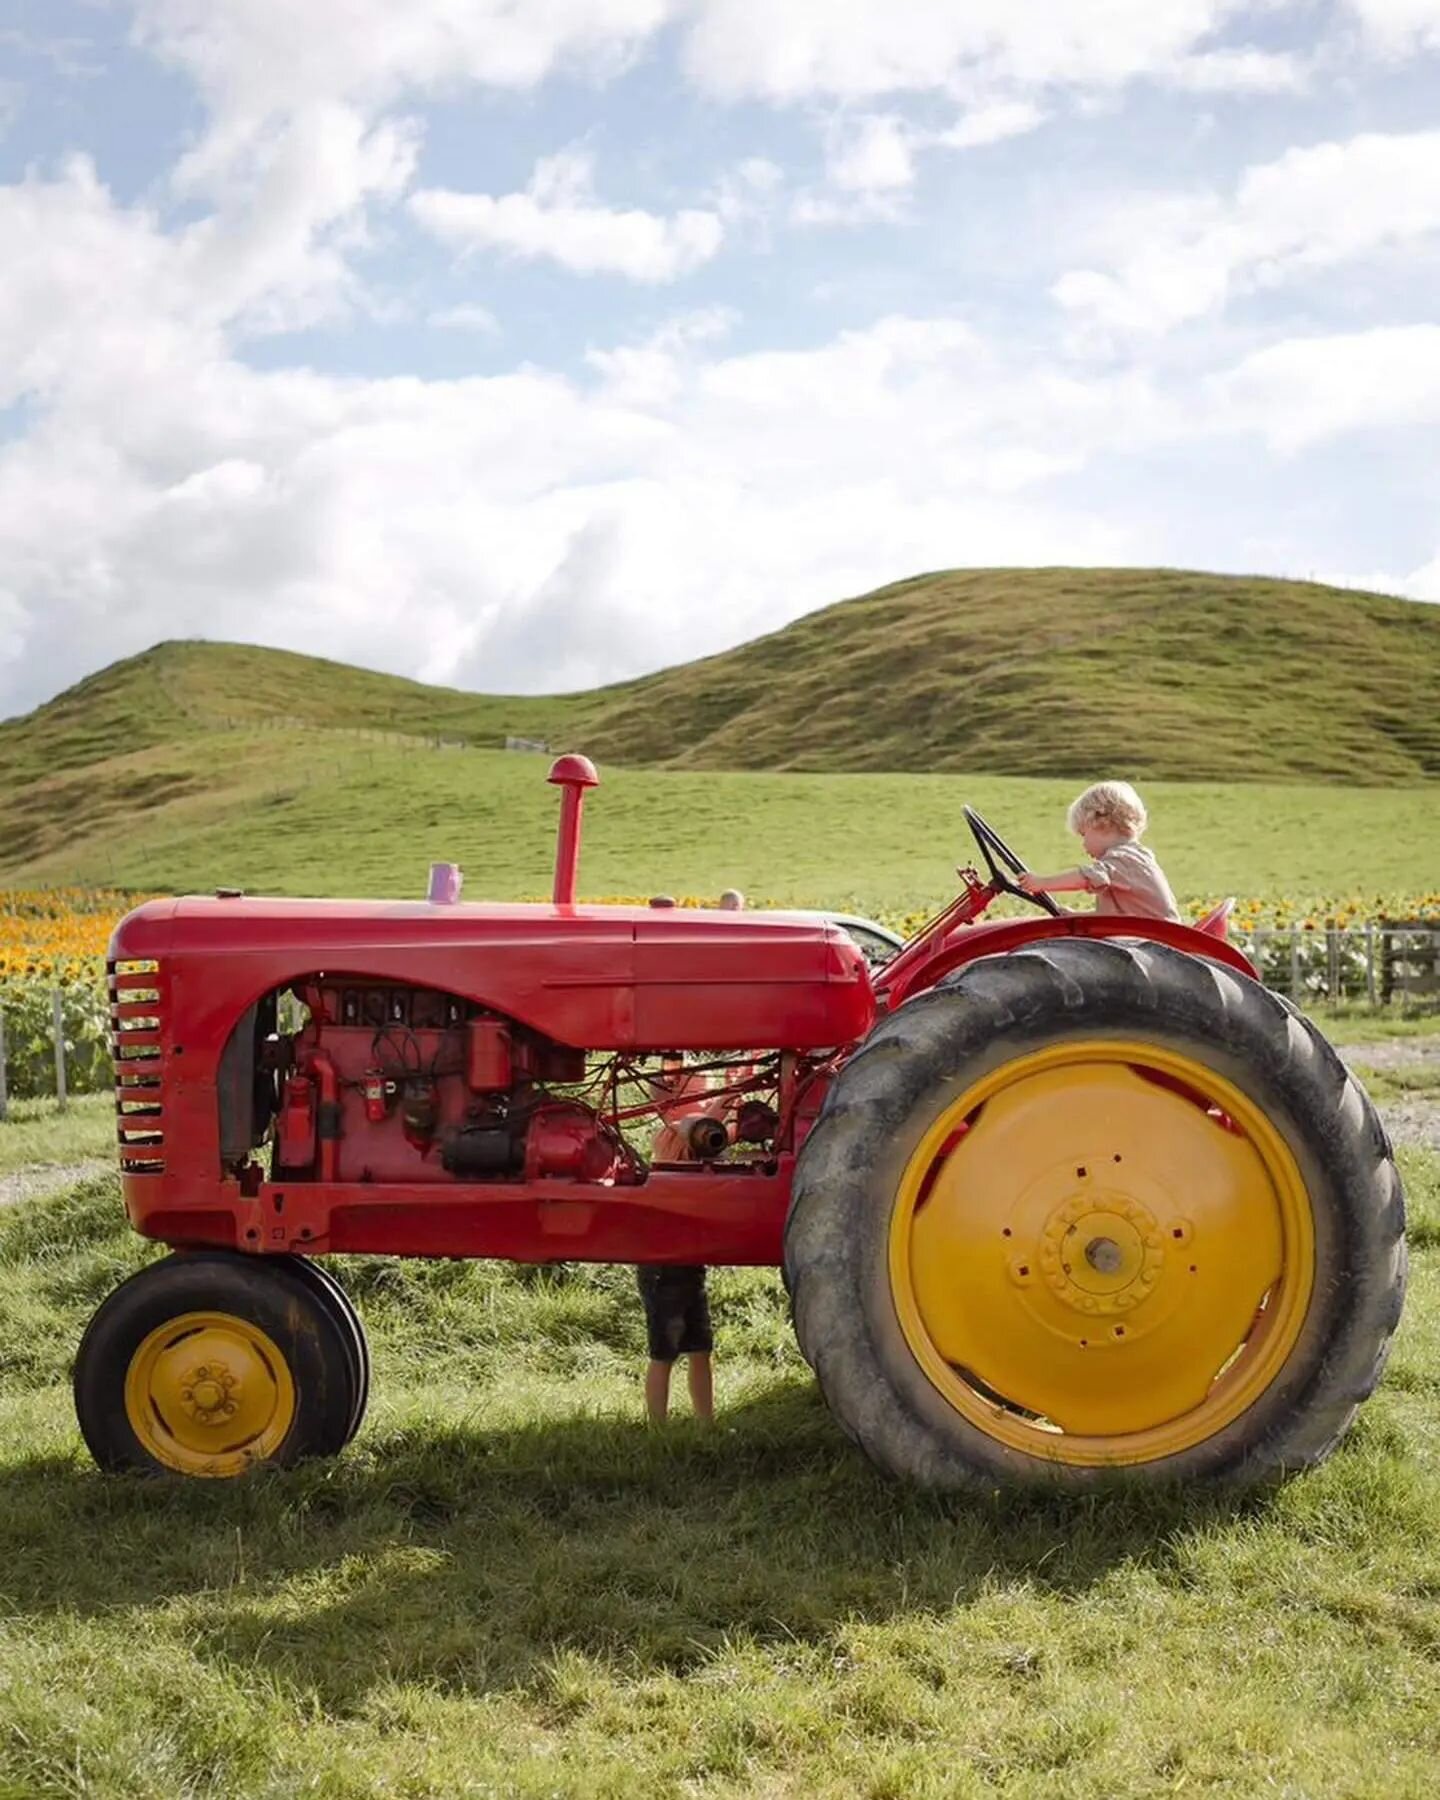 These old Tractors have been an absolute hit with all our visitors this year. We have been lucky enough to borrow two of these beauties from our neighbour's collection. They are going home on Monday and we will be sad to see them go, so come have a p